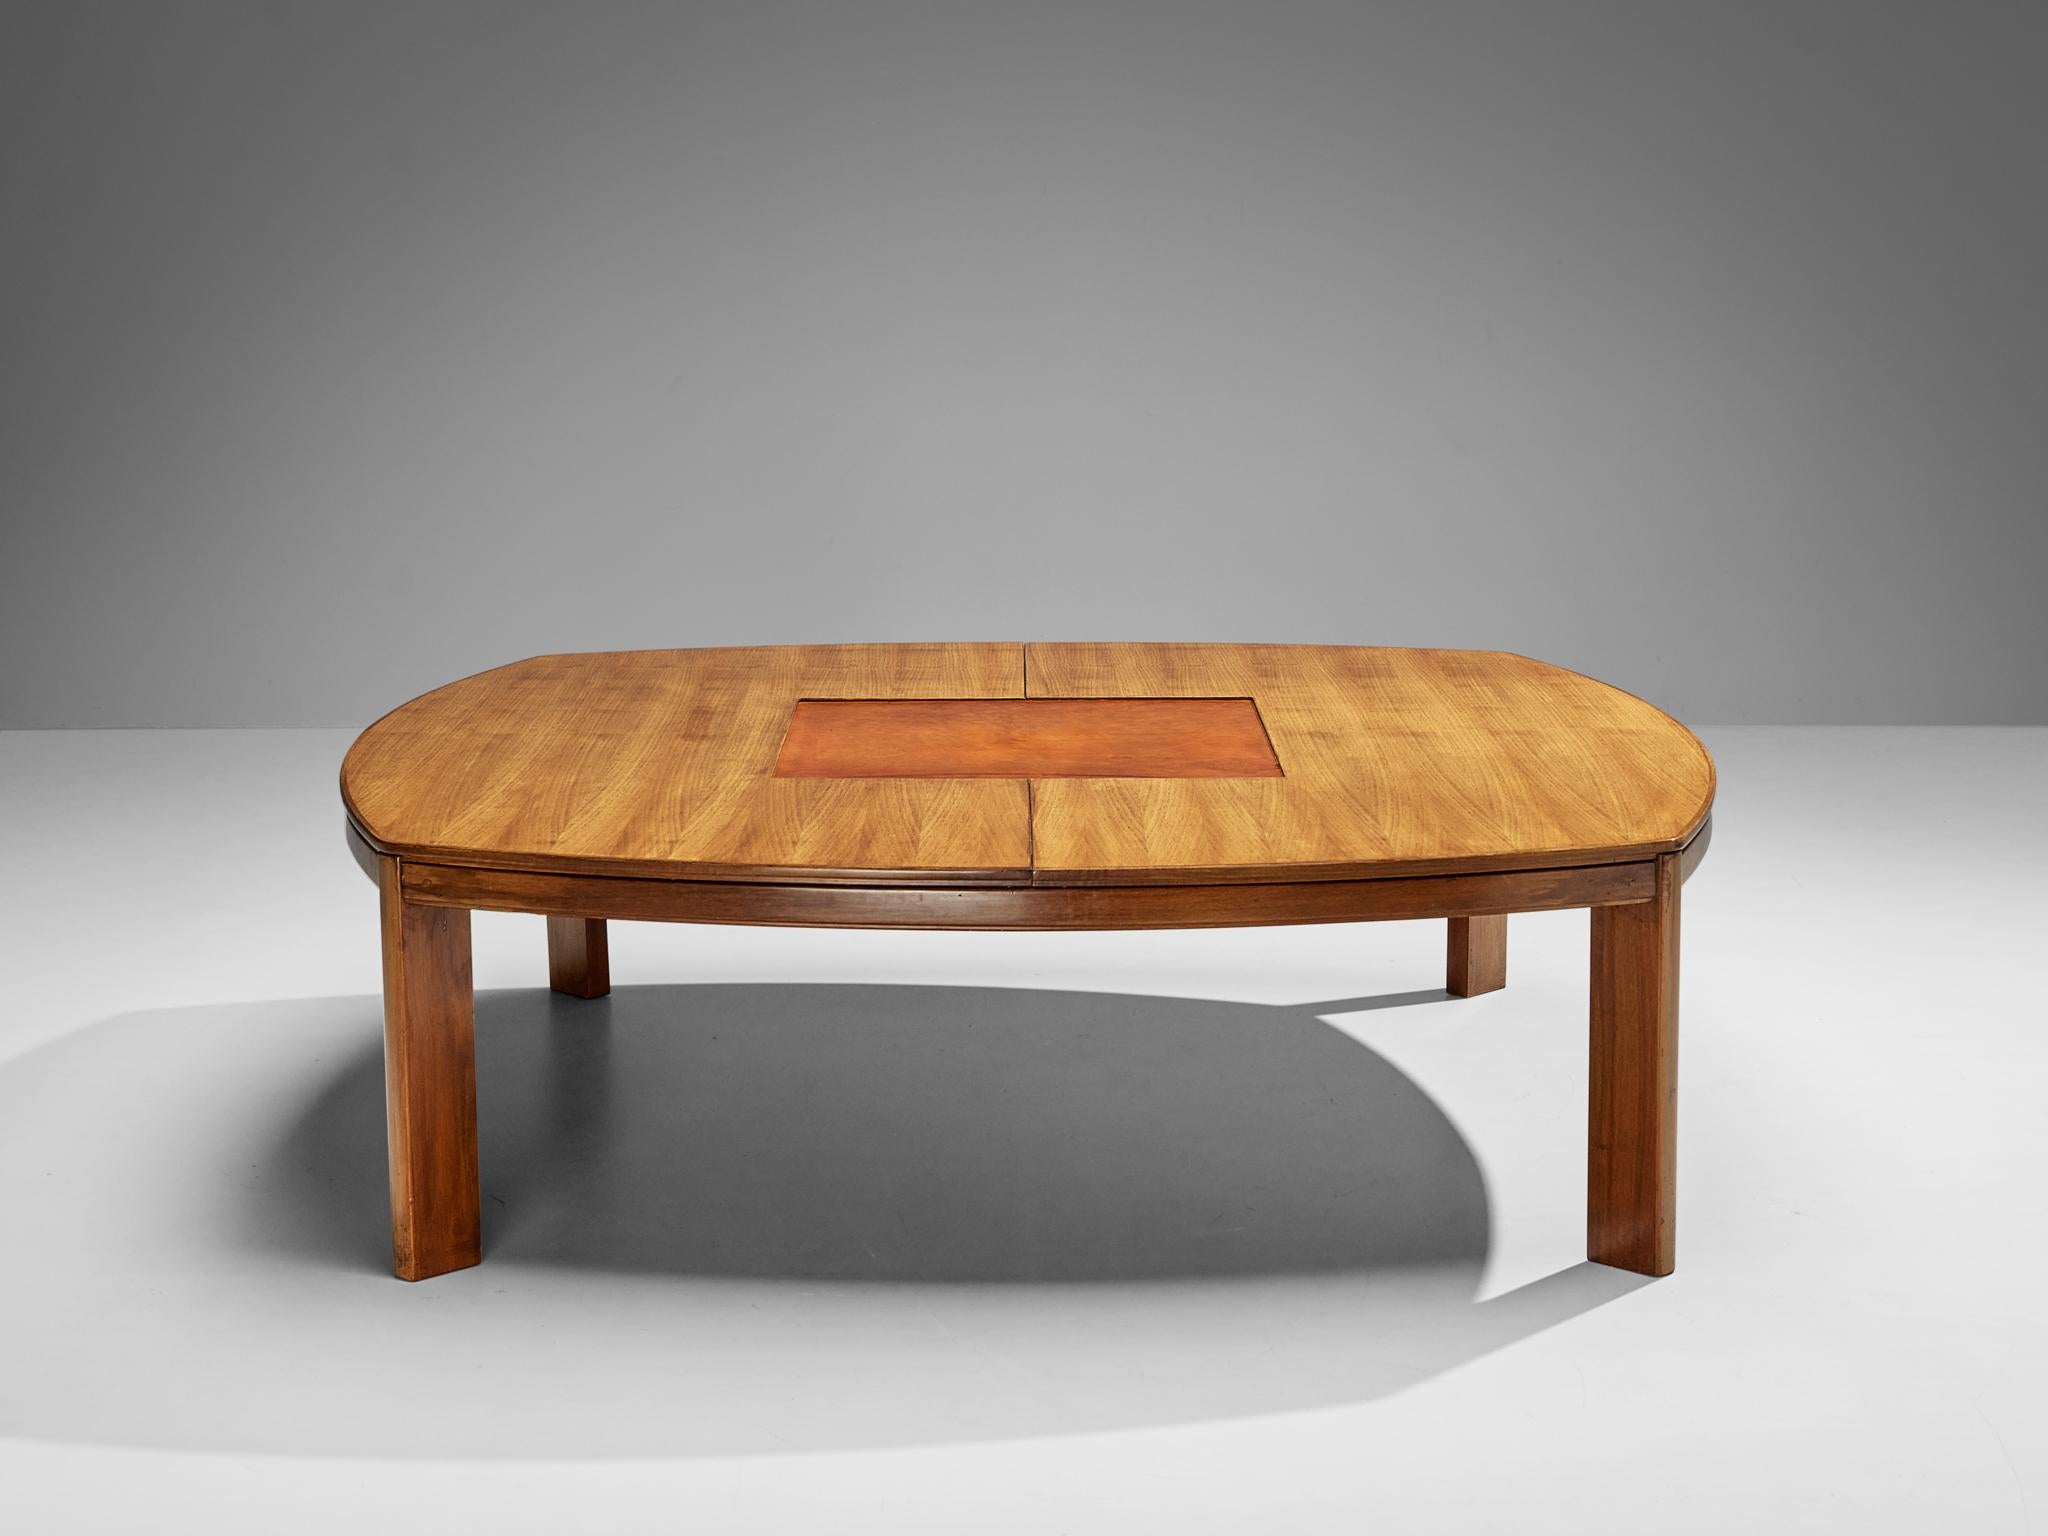 Dining or conference table, walnut, cognac leather, Italy, 1960s

This furniture piece's versatility is due to its substantial size, making it an optimal option for various functions, including serving as a conference table or dining table. In this